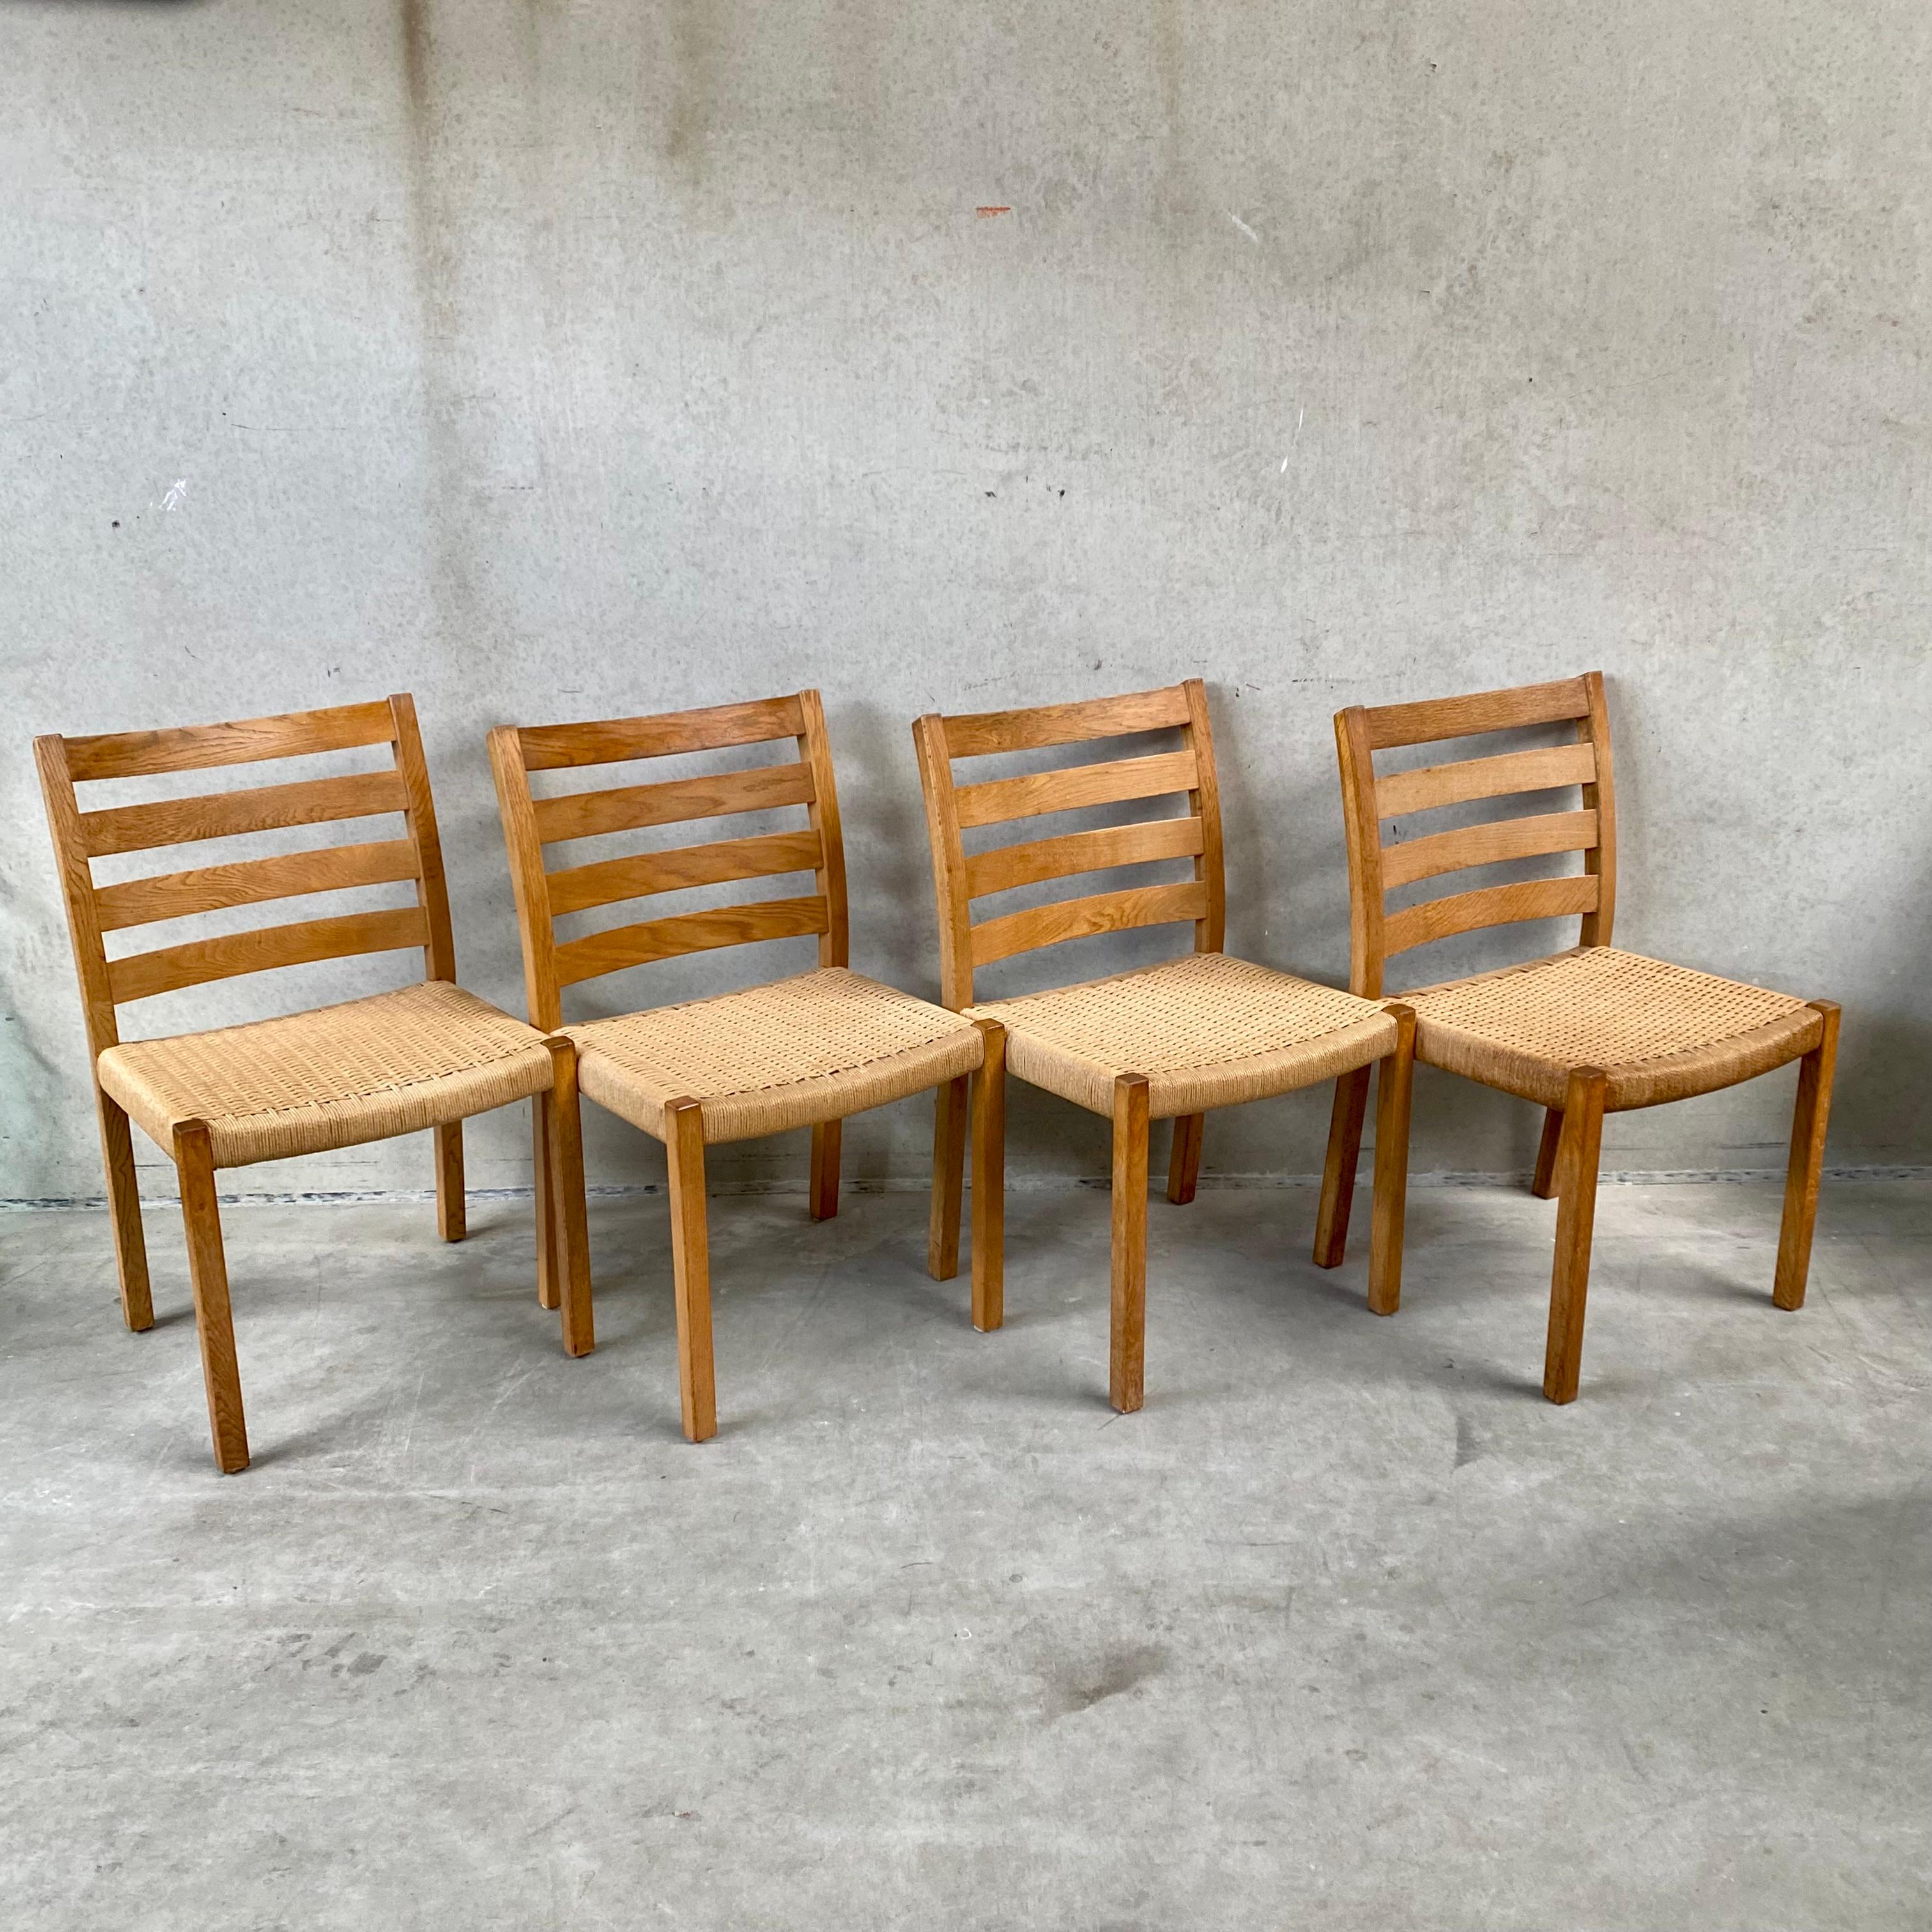 Introducing the exquisite set of 4 dining chairs by J.L. Møllers Møbelfabrik - a testament to the timeless elegance of Scandinavian design. The model 408 chairs feature a stunning papercord seat and sturdy birch wood frame, making them both